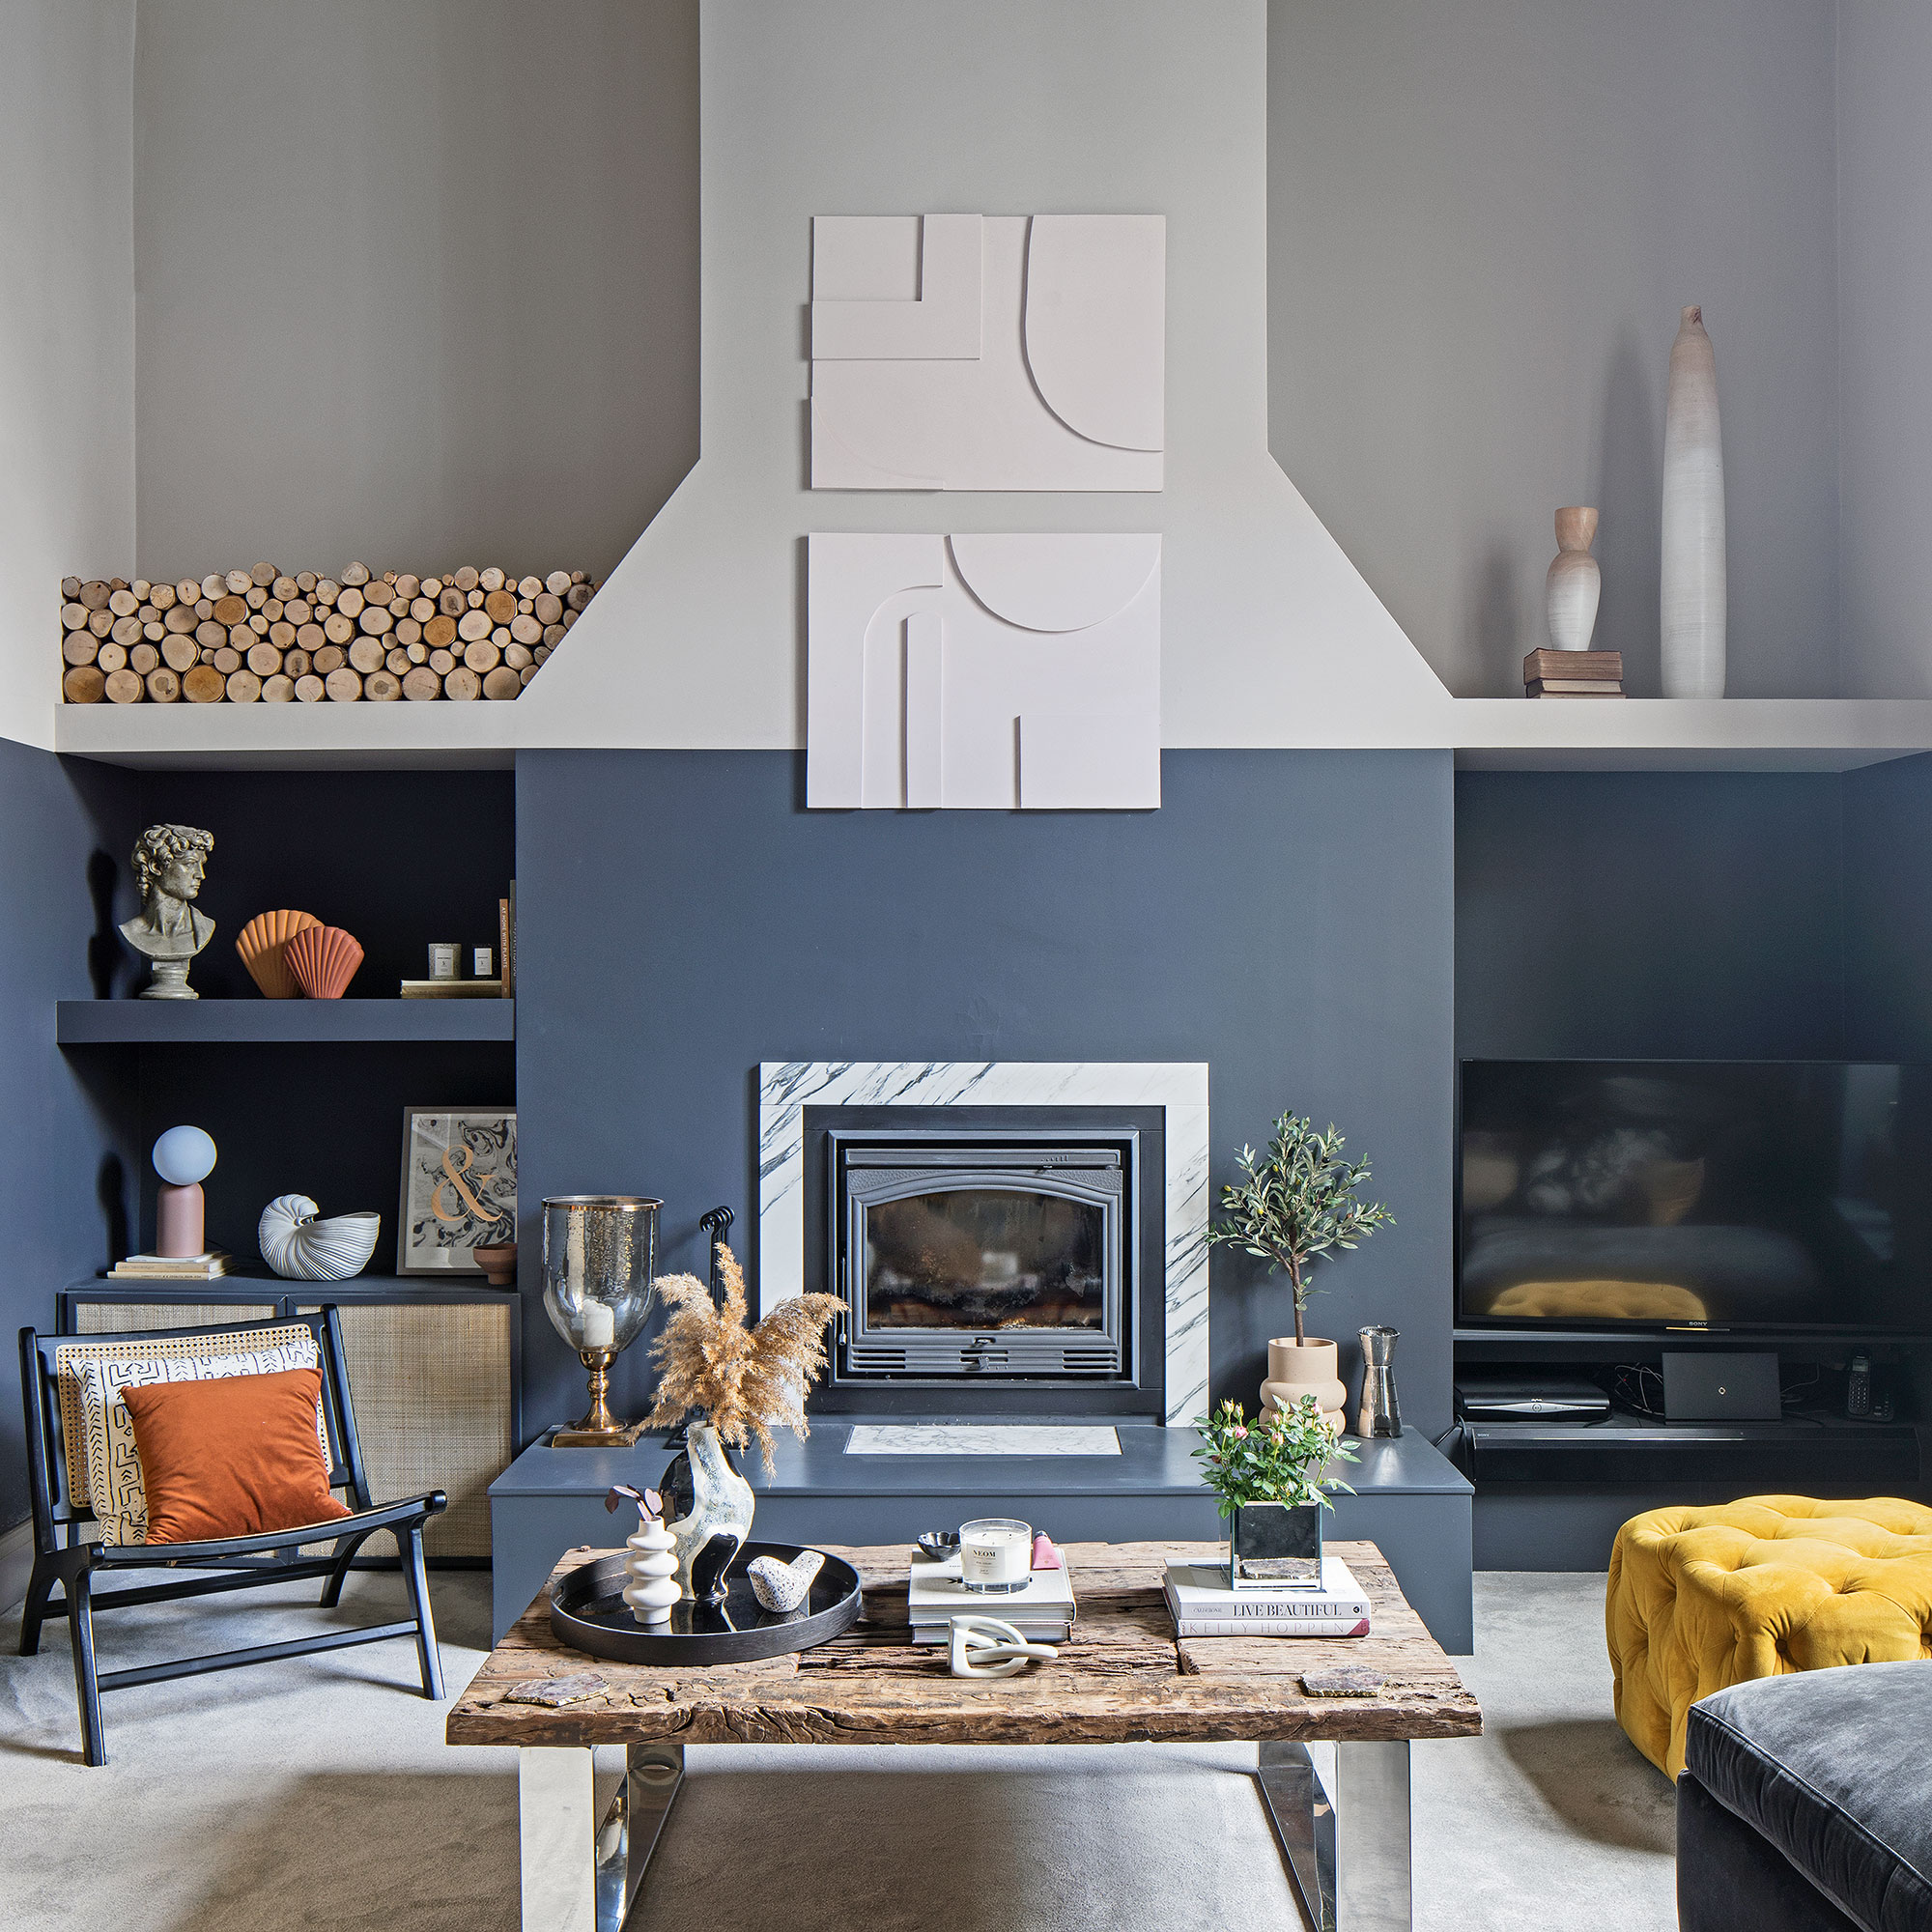 Minero Sótano marxista 44 grey living room ideas from dove to charcoal to suit every scheme |  Ideal Home